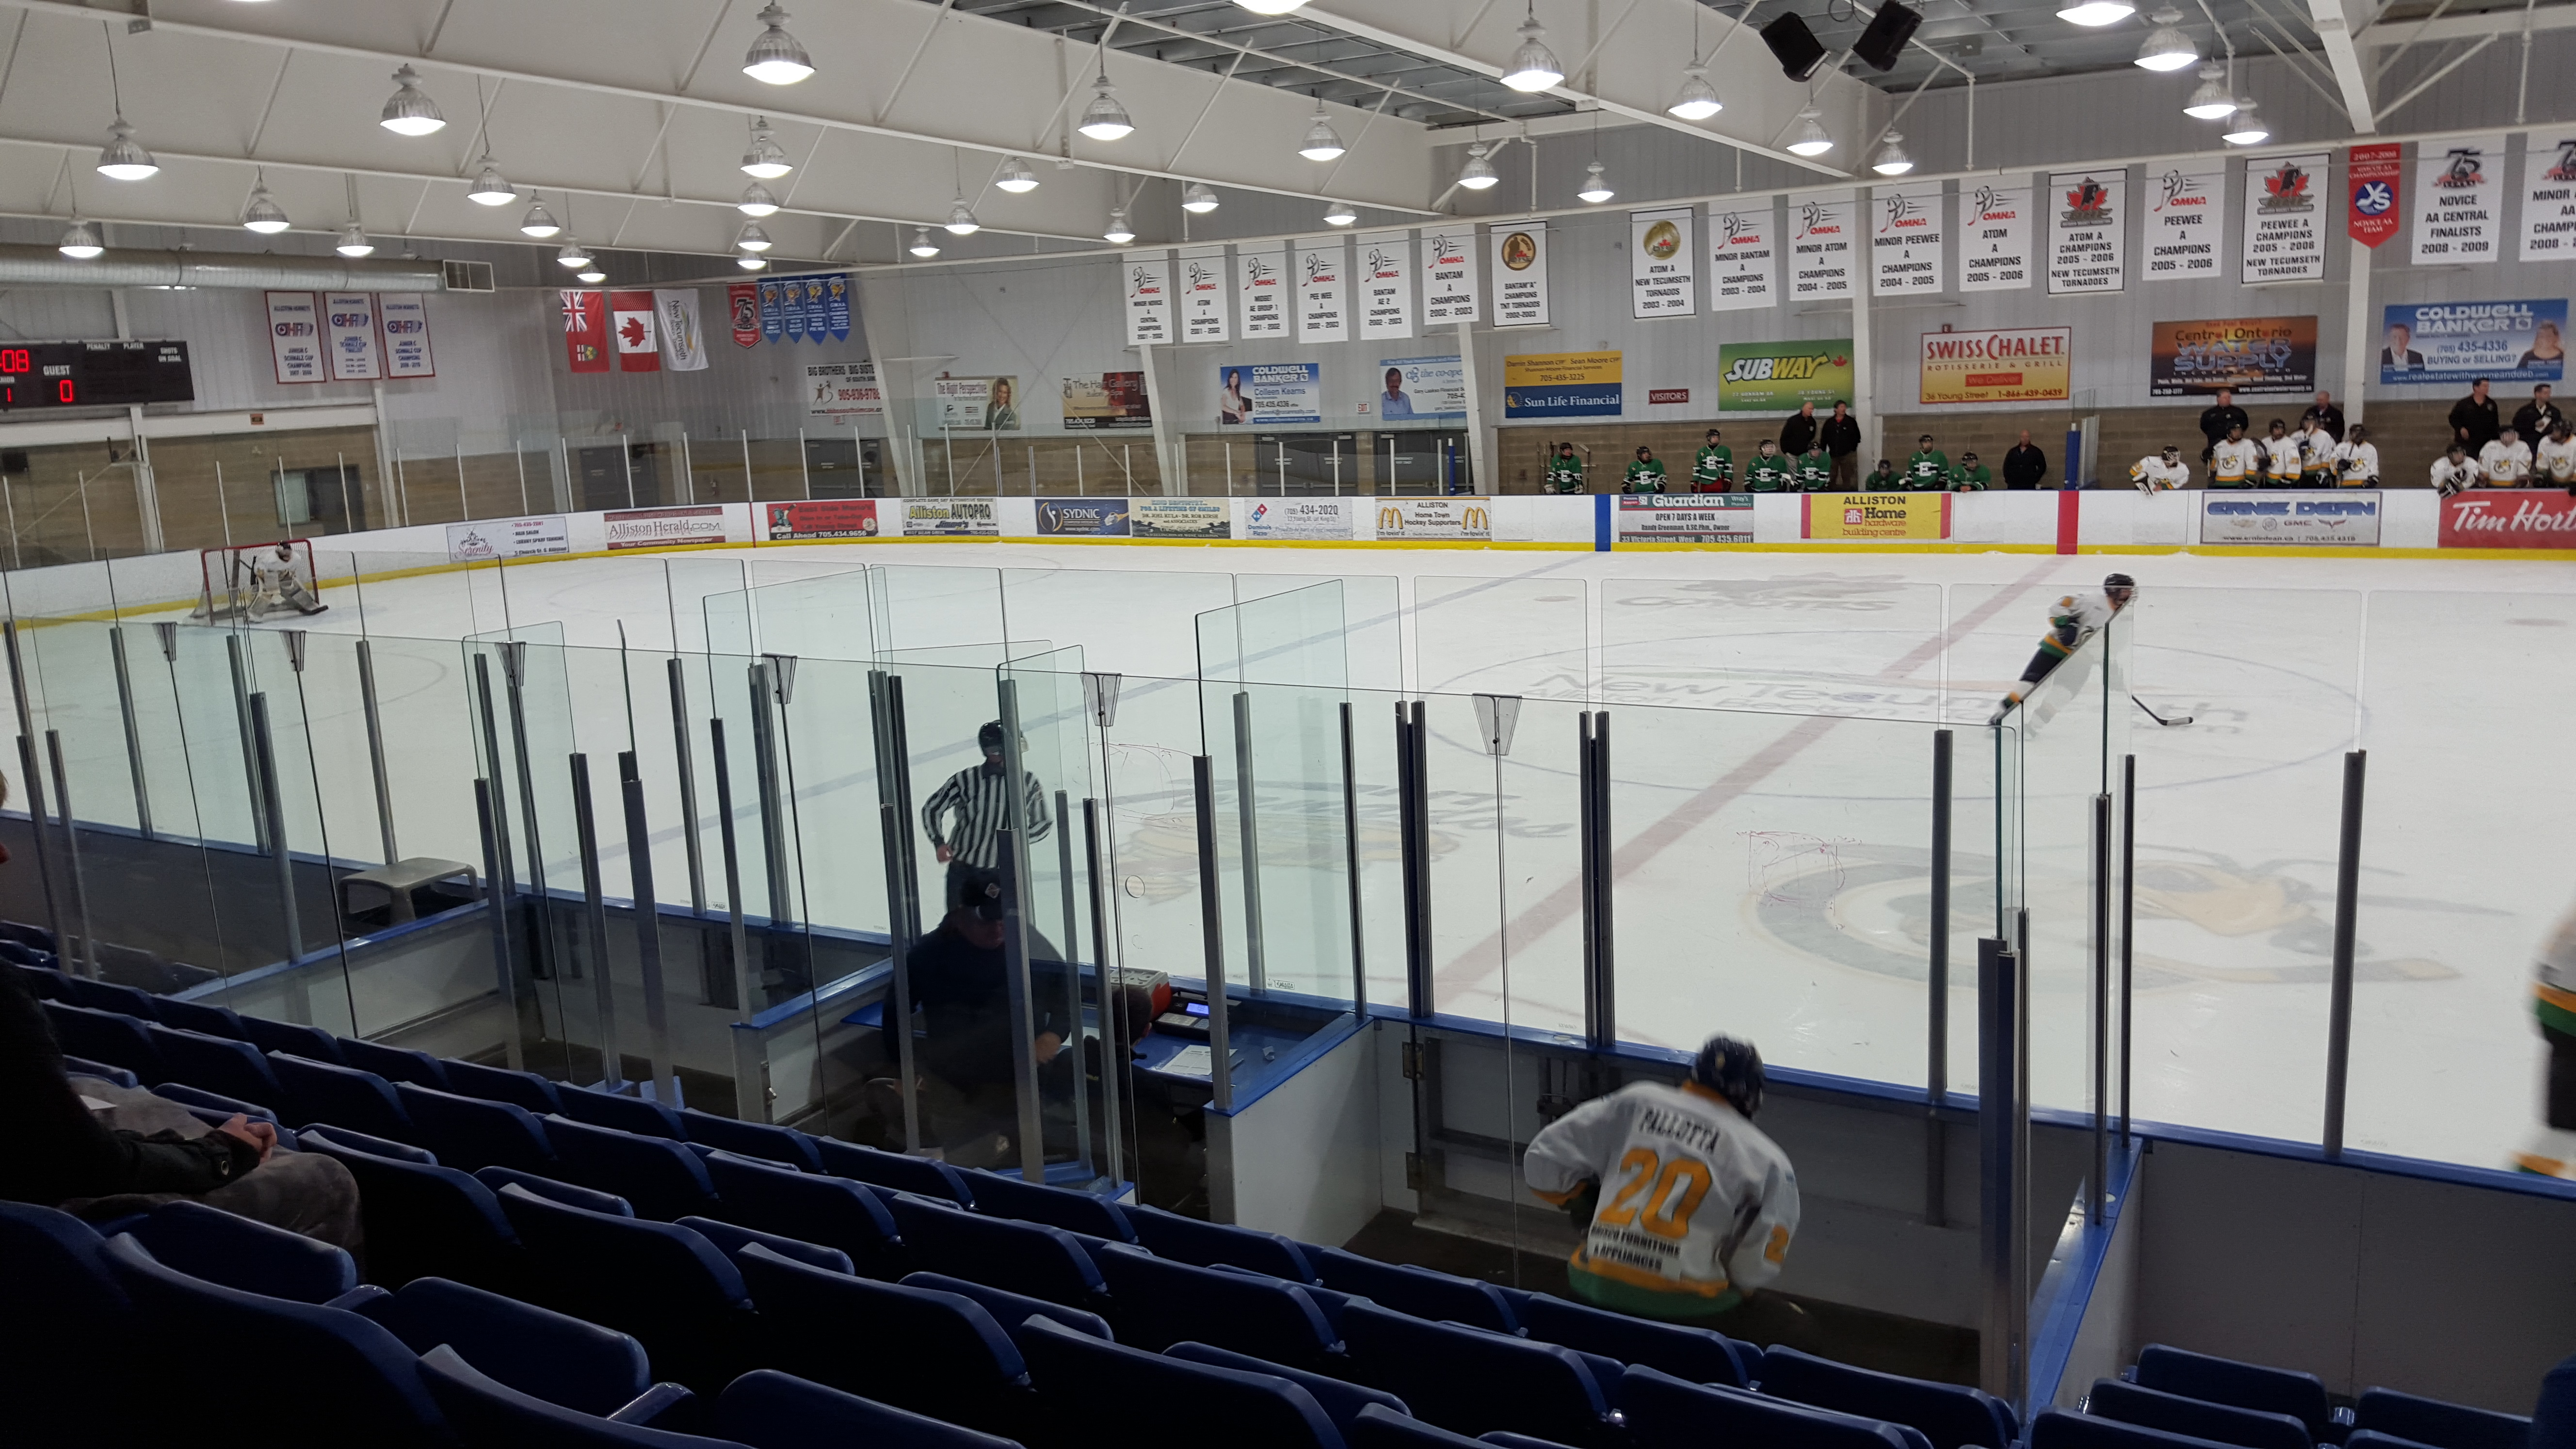 In Another Hockey Rink